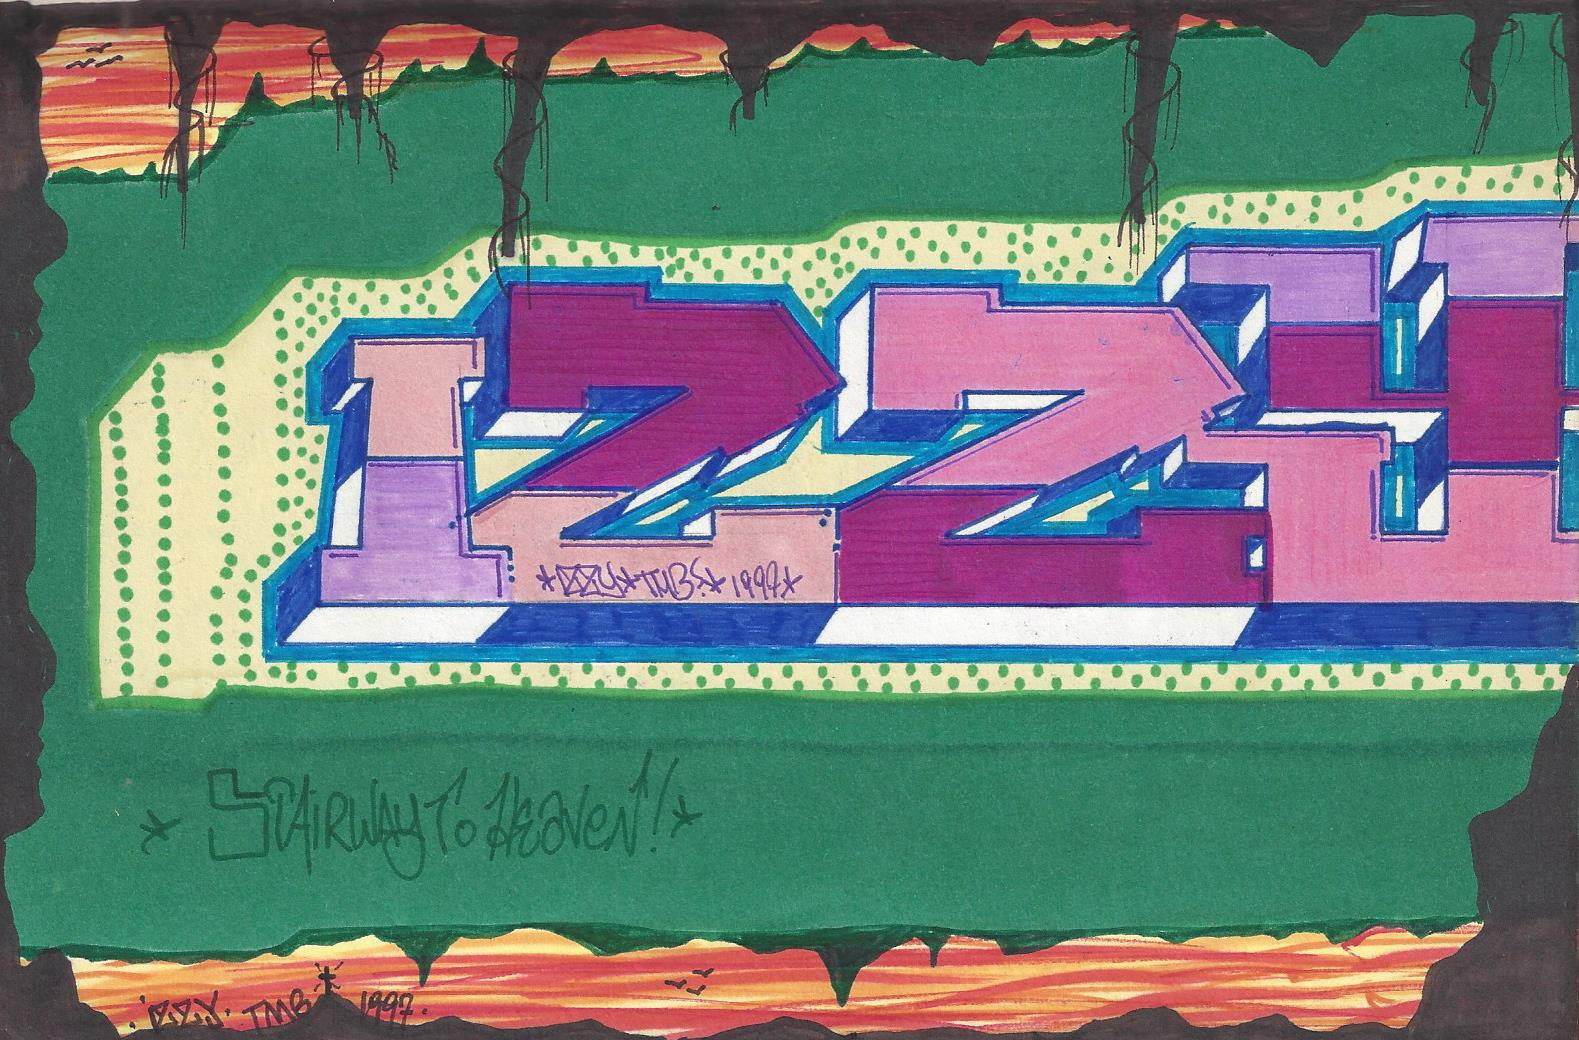 IZ THE WIZ - "Turn out the lights" Drawing